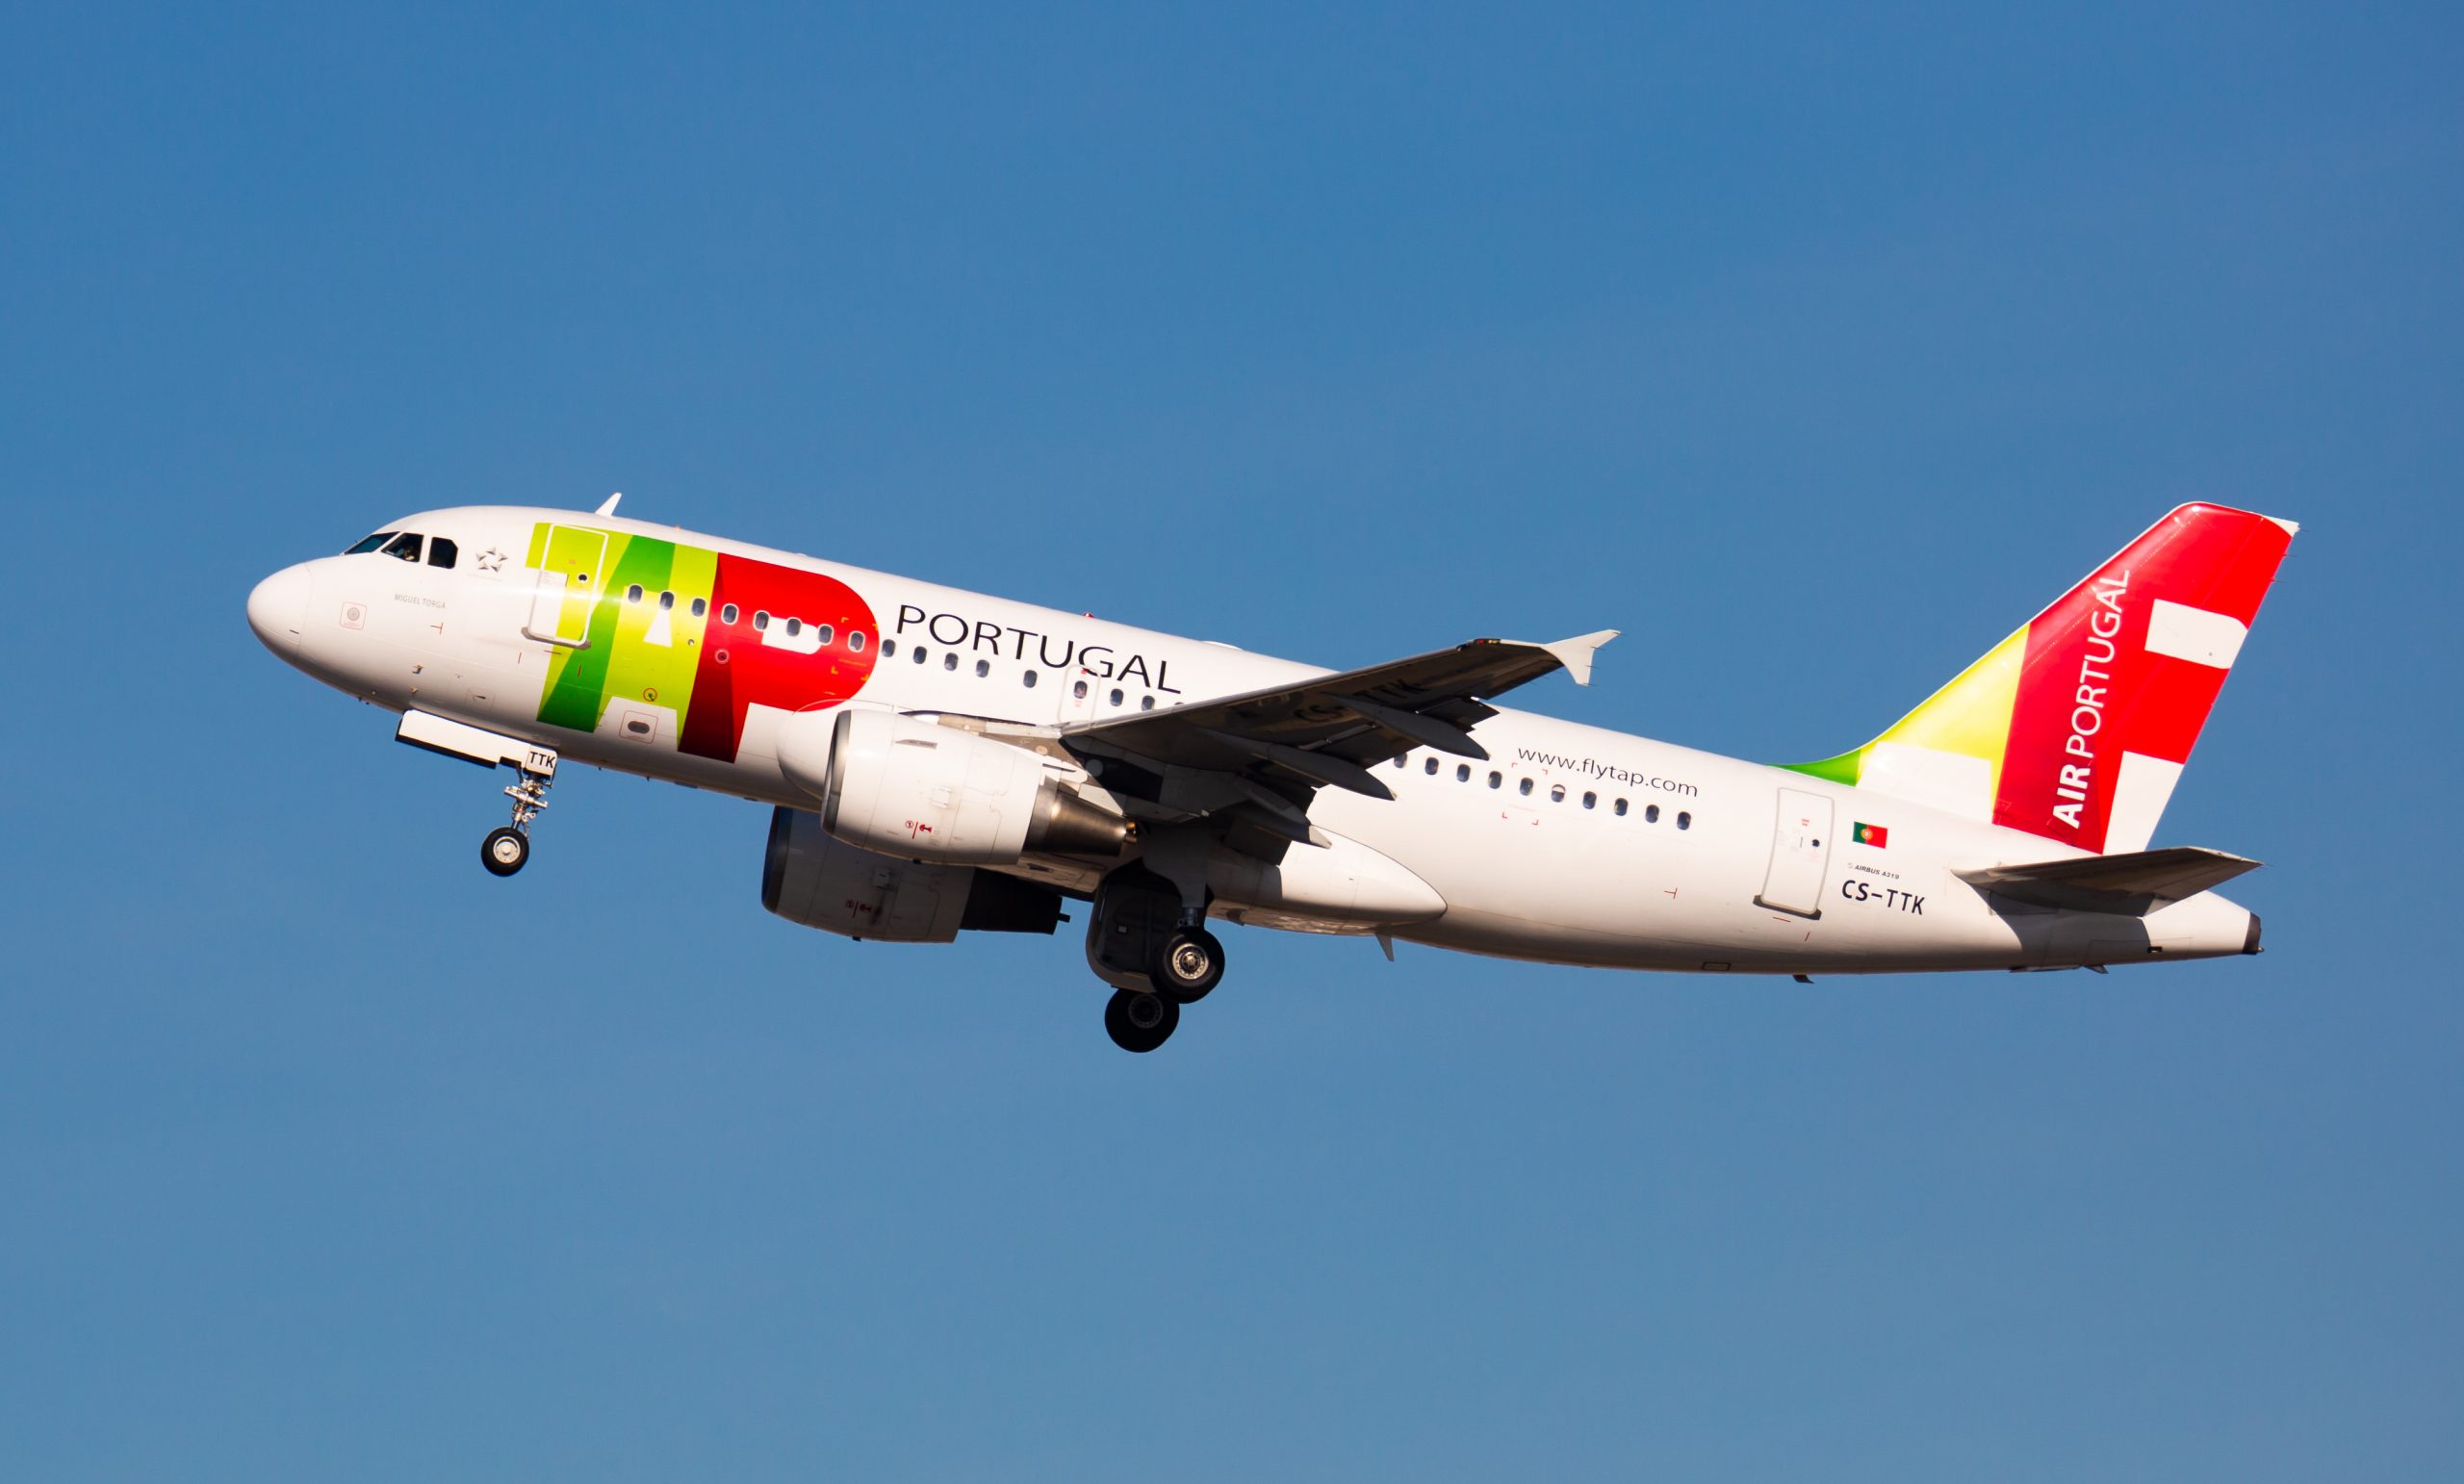 TAP Air Portugal Airbus A319 CS-TTK taking off from Barcelona Airport